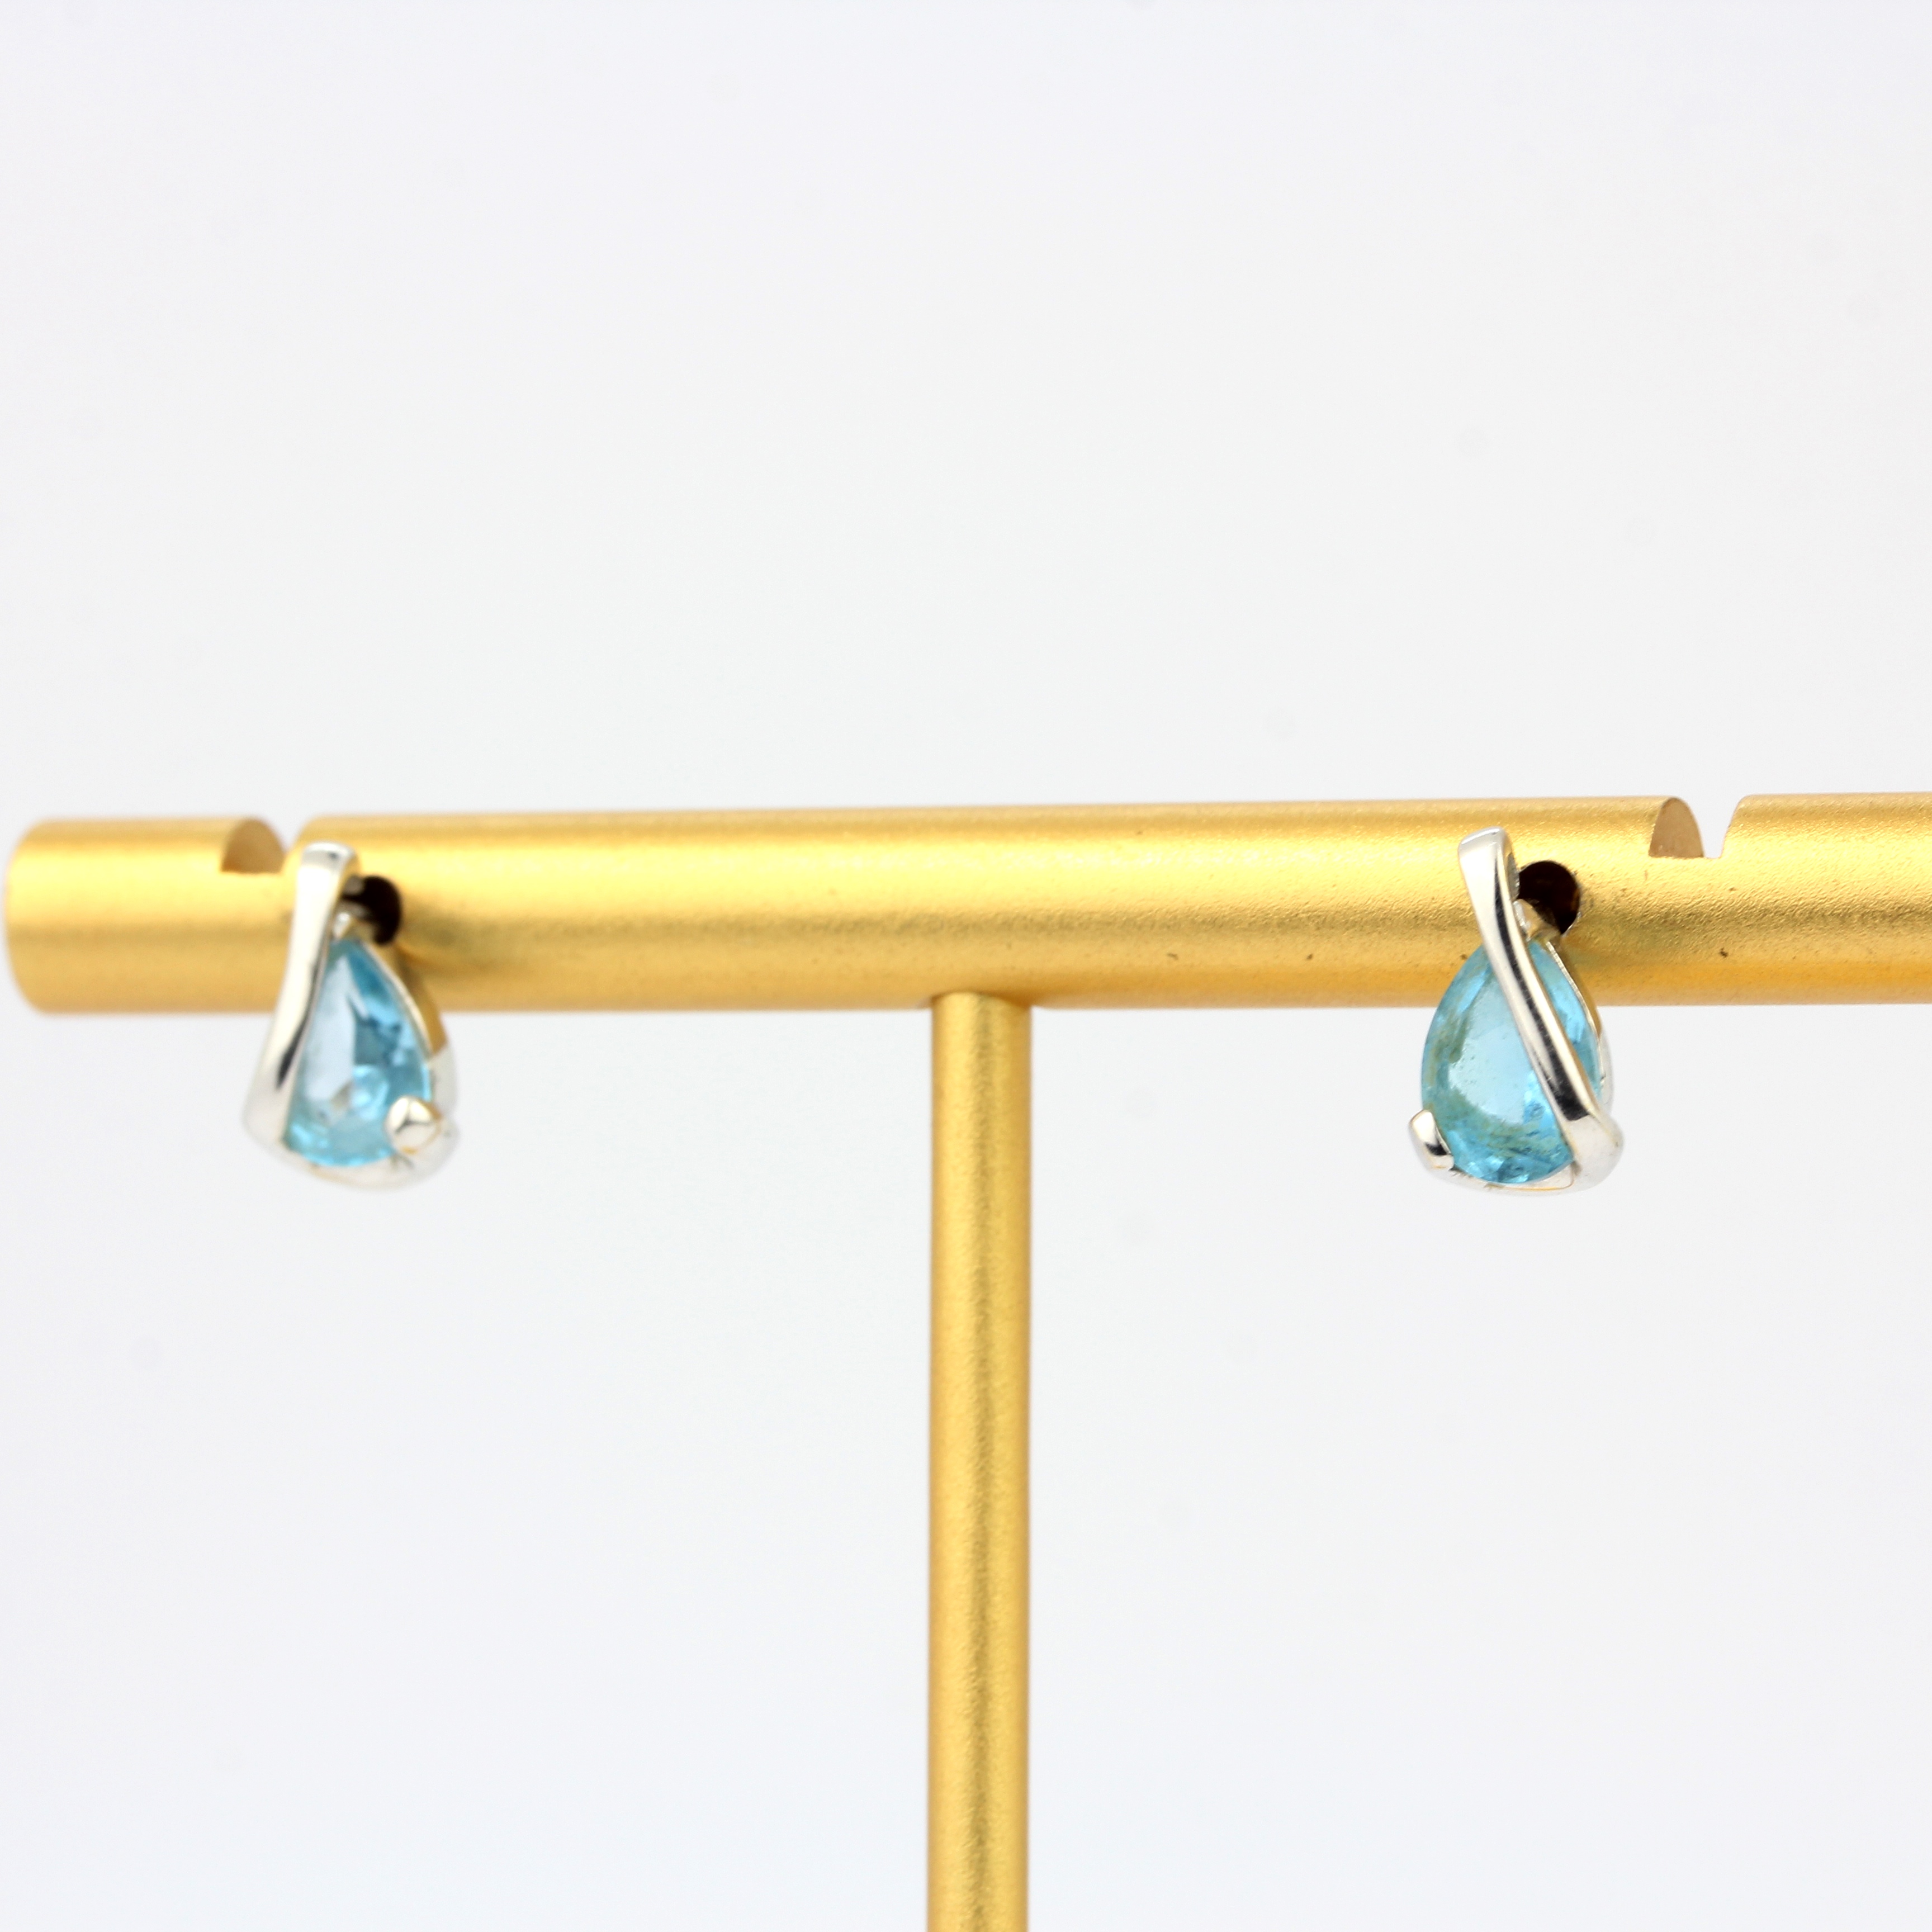 A pair of 925 silver earrings set with pear cut blue topaz, L. 1cm. - Image 3 of 3